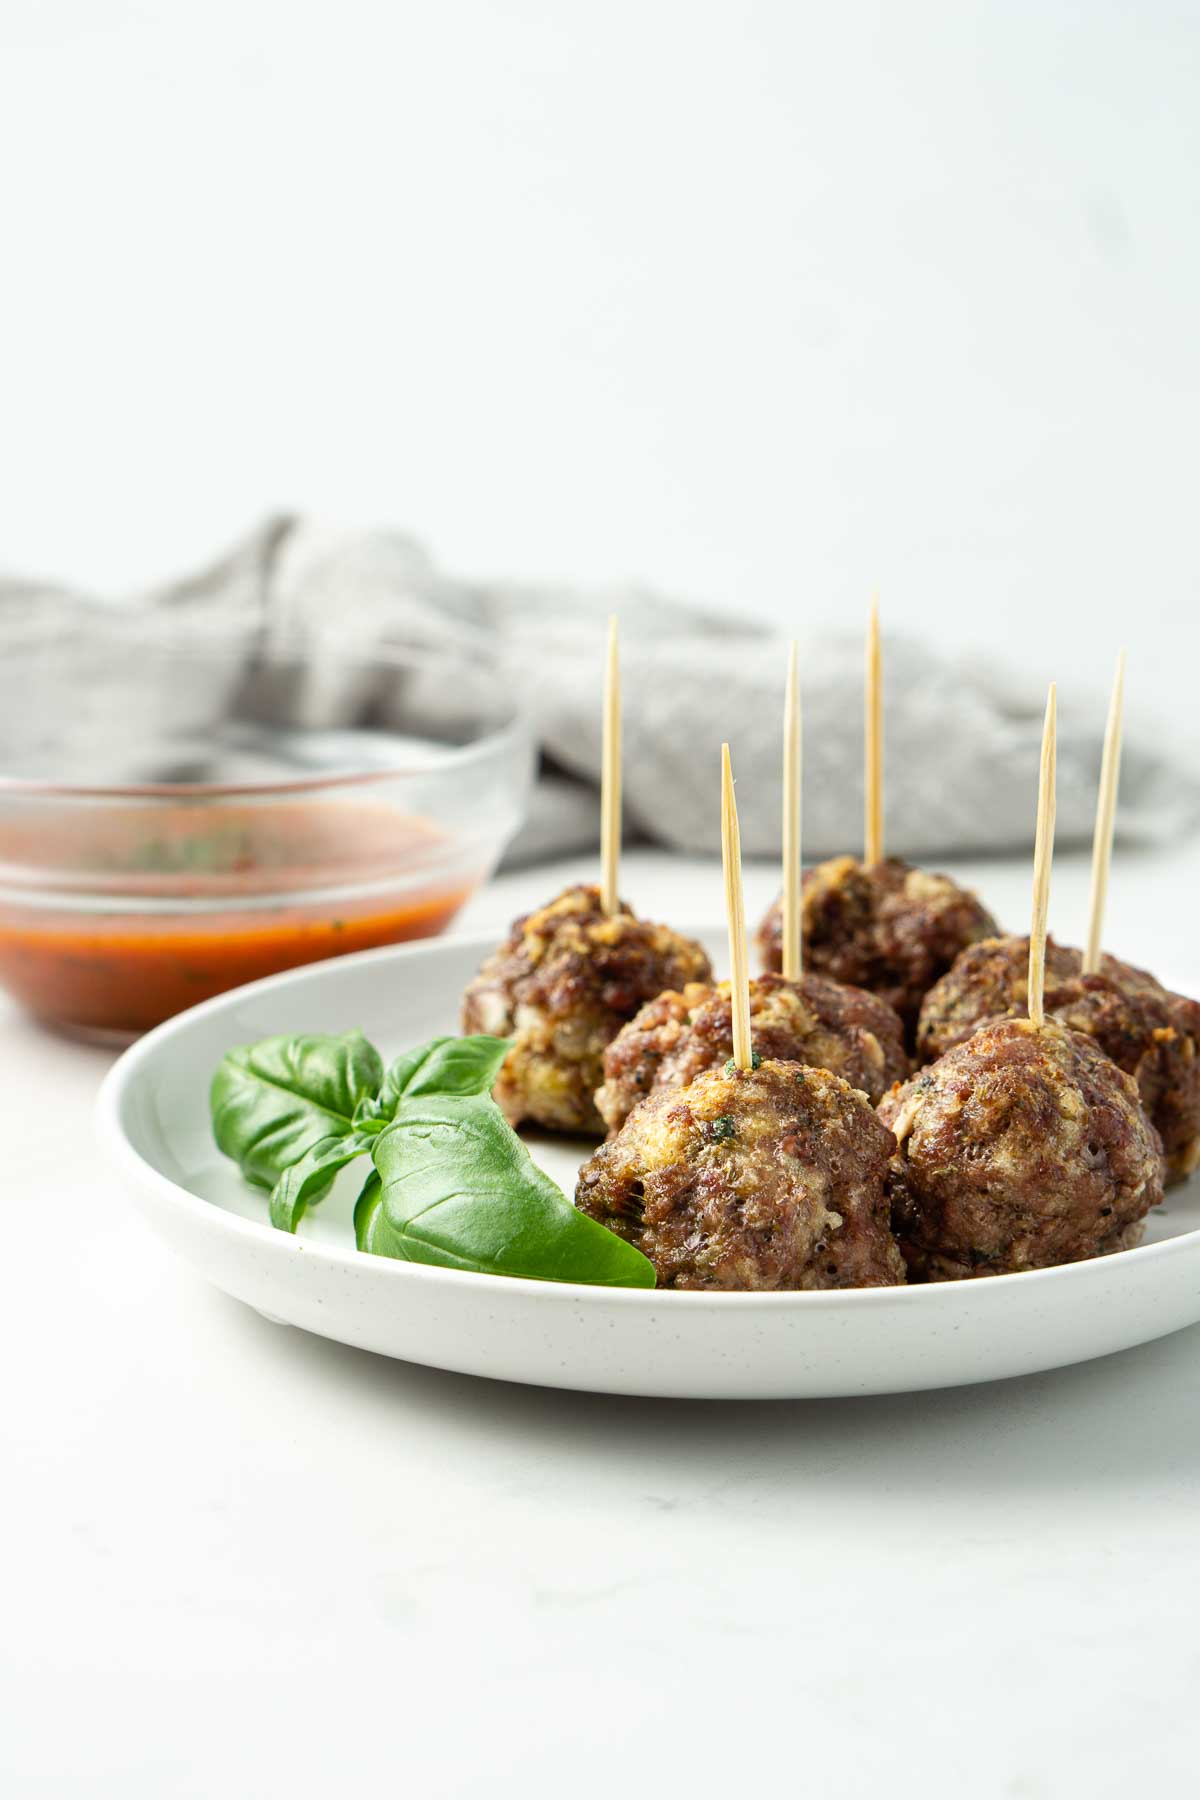 Meatballs on a plate ready for serving